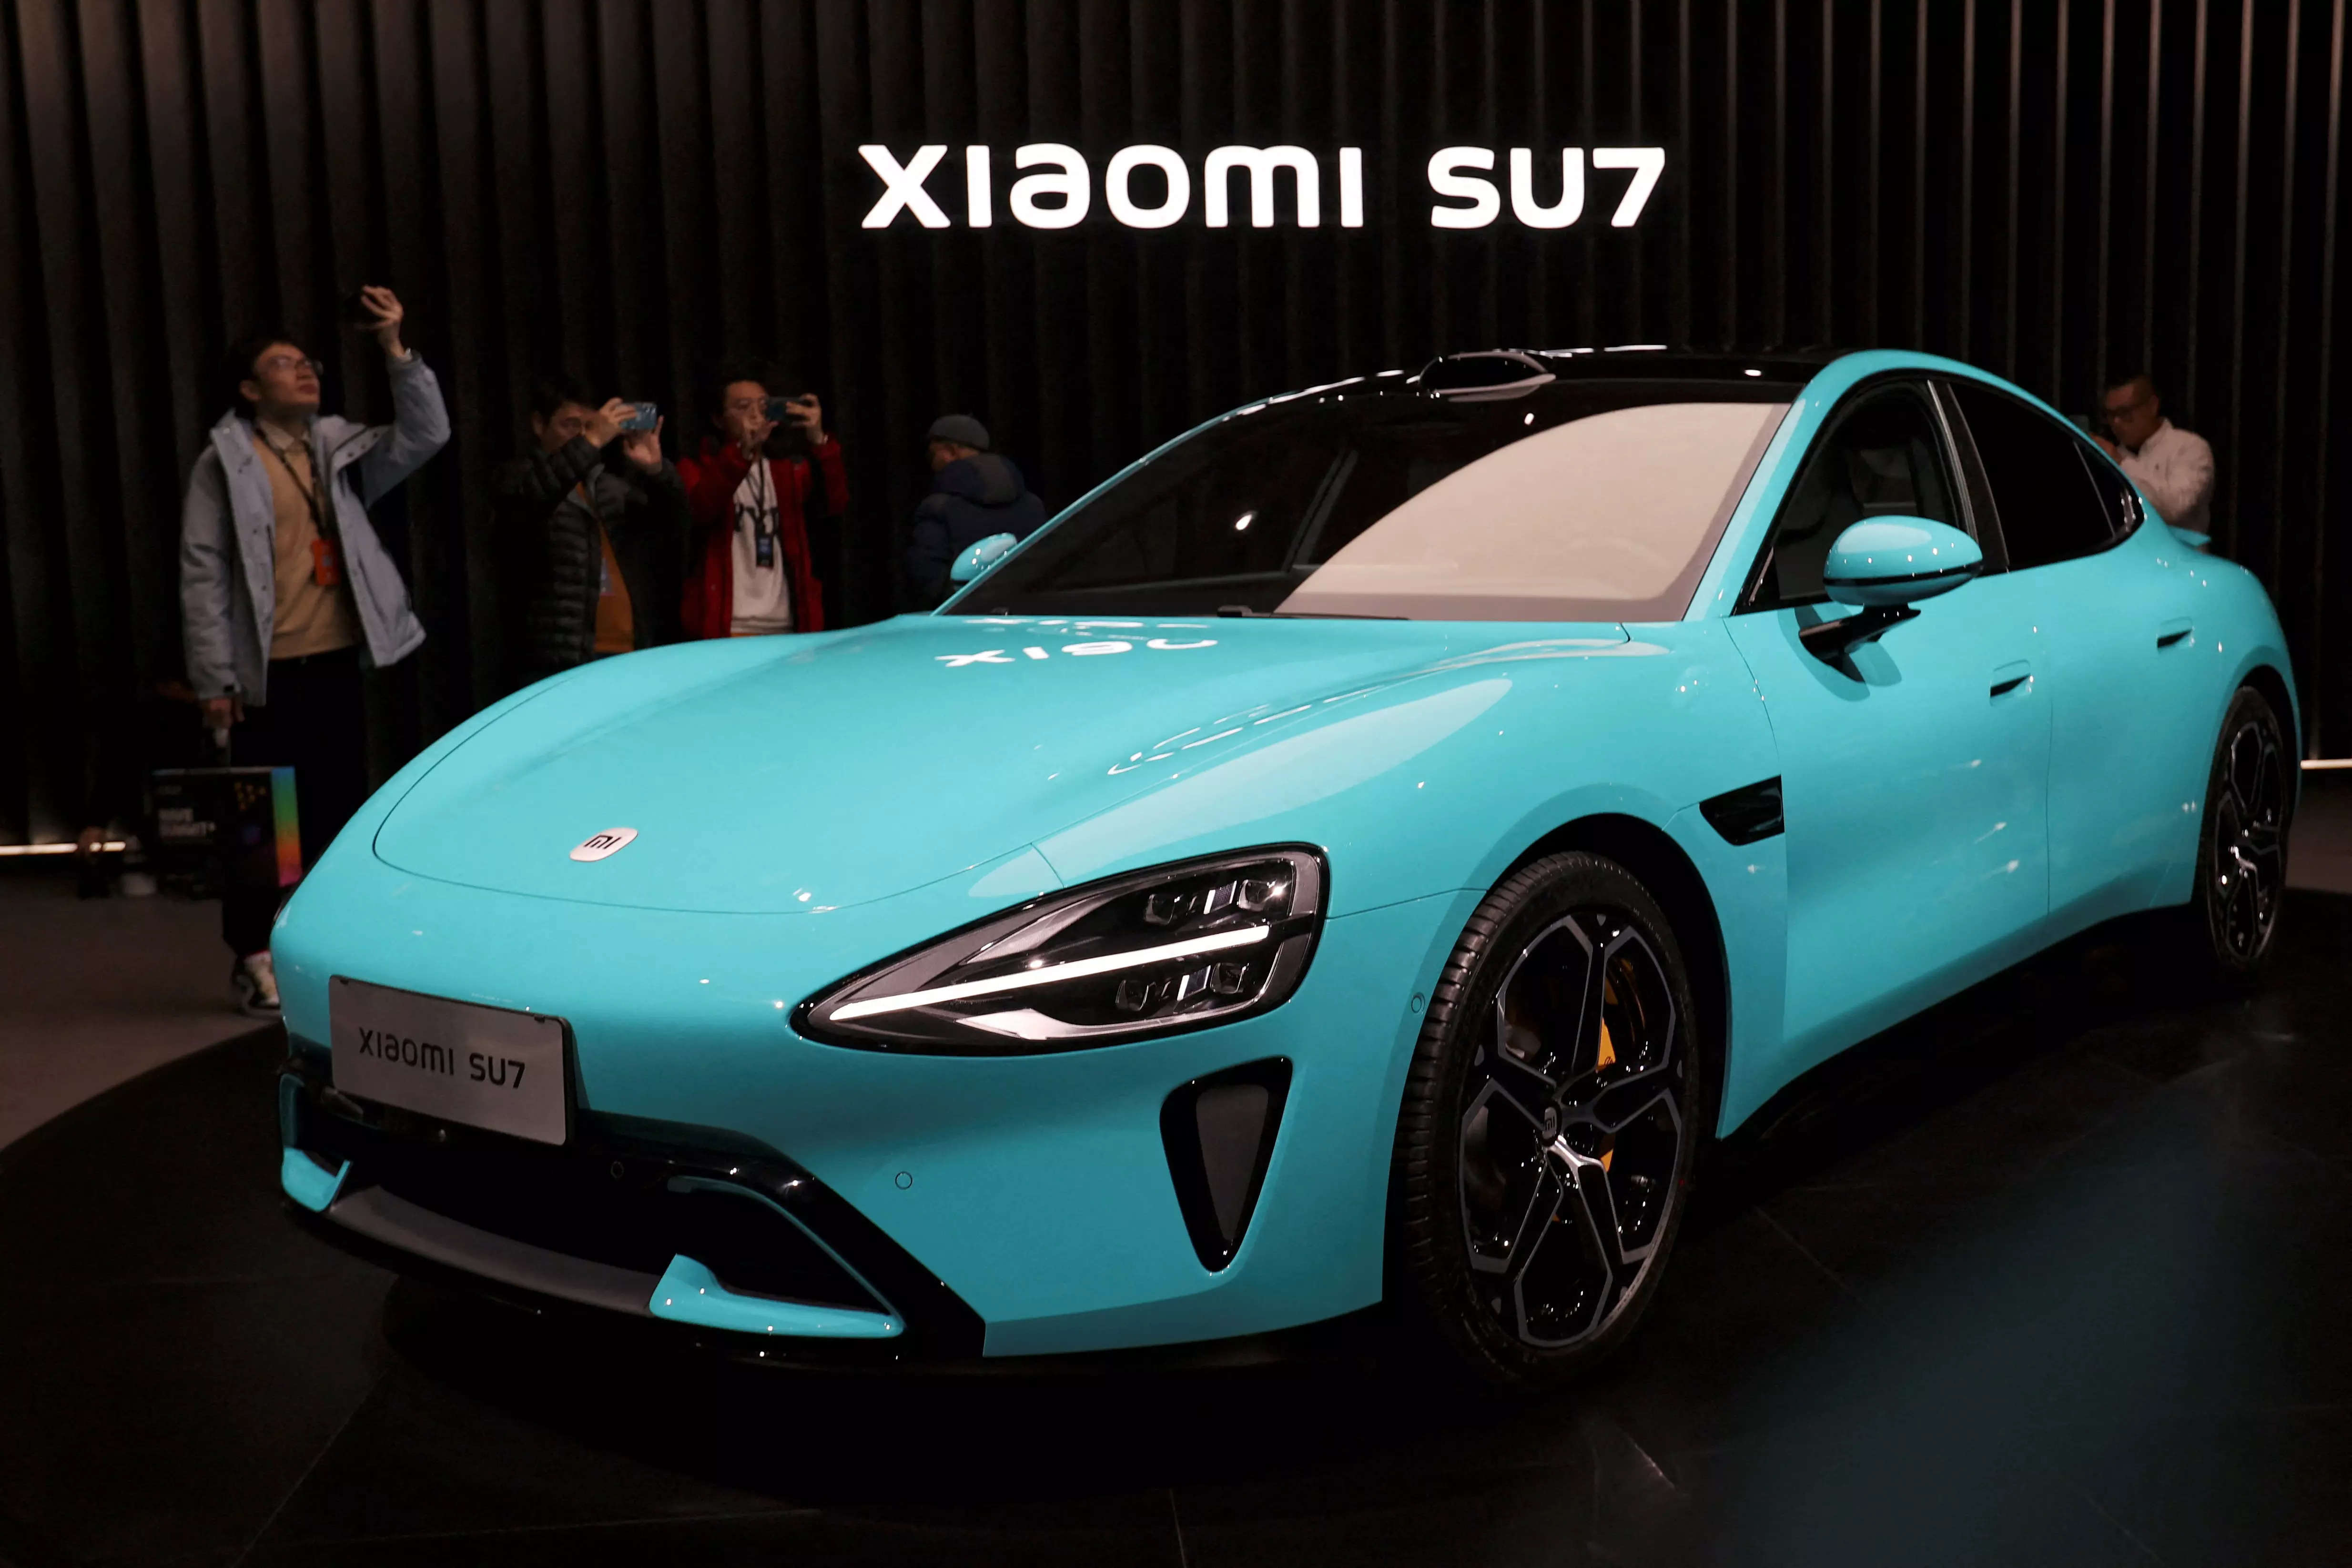 <p>The SU7 will come in two versions - one with a driving range of up to 668km (415 miles) on a single charge and another with a range of up to 800km. By comparison, Tesla's Model S has a range of up to 650km.</p>